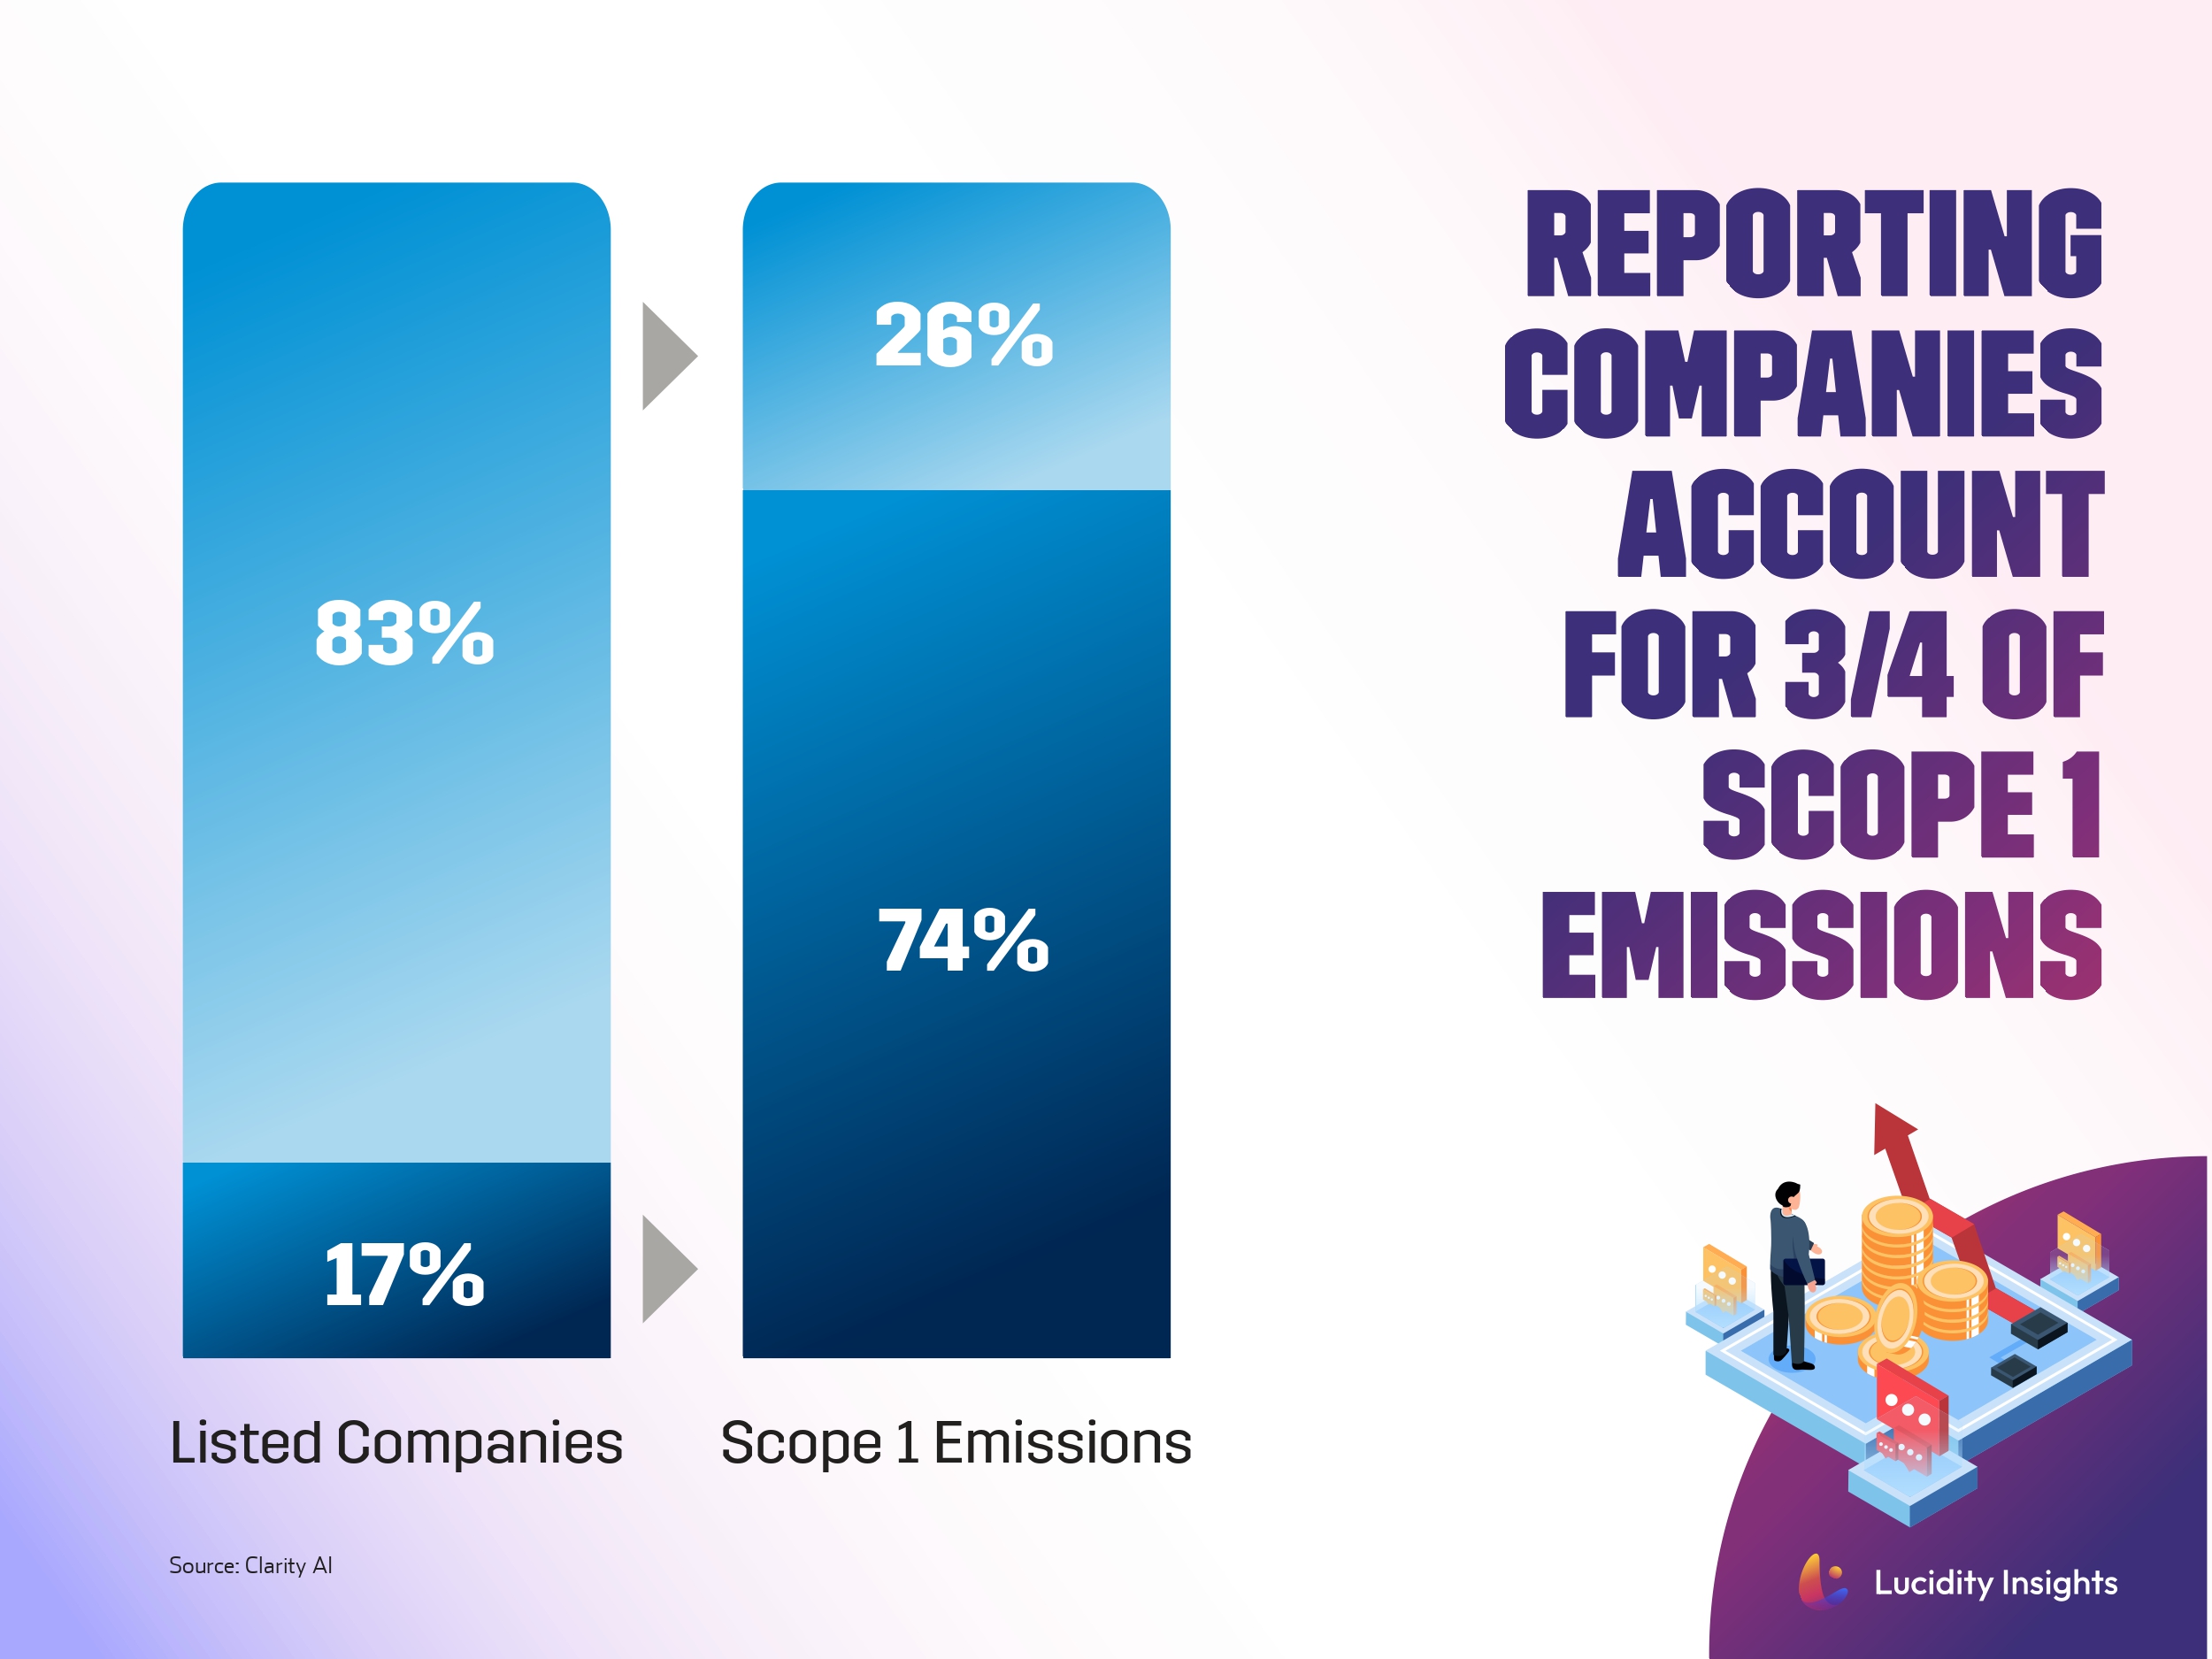 Reporting Companies Account for 3/4 of Scope 1 Emissions